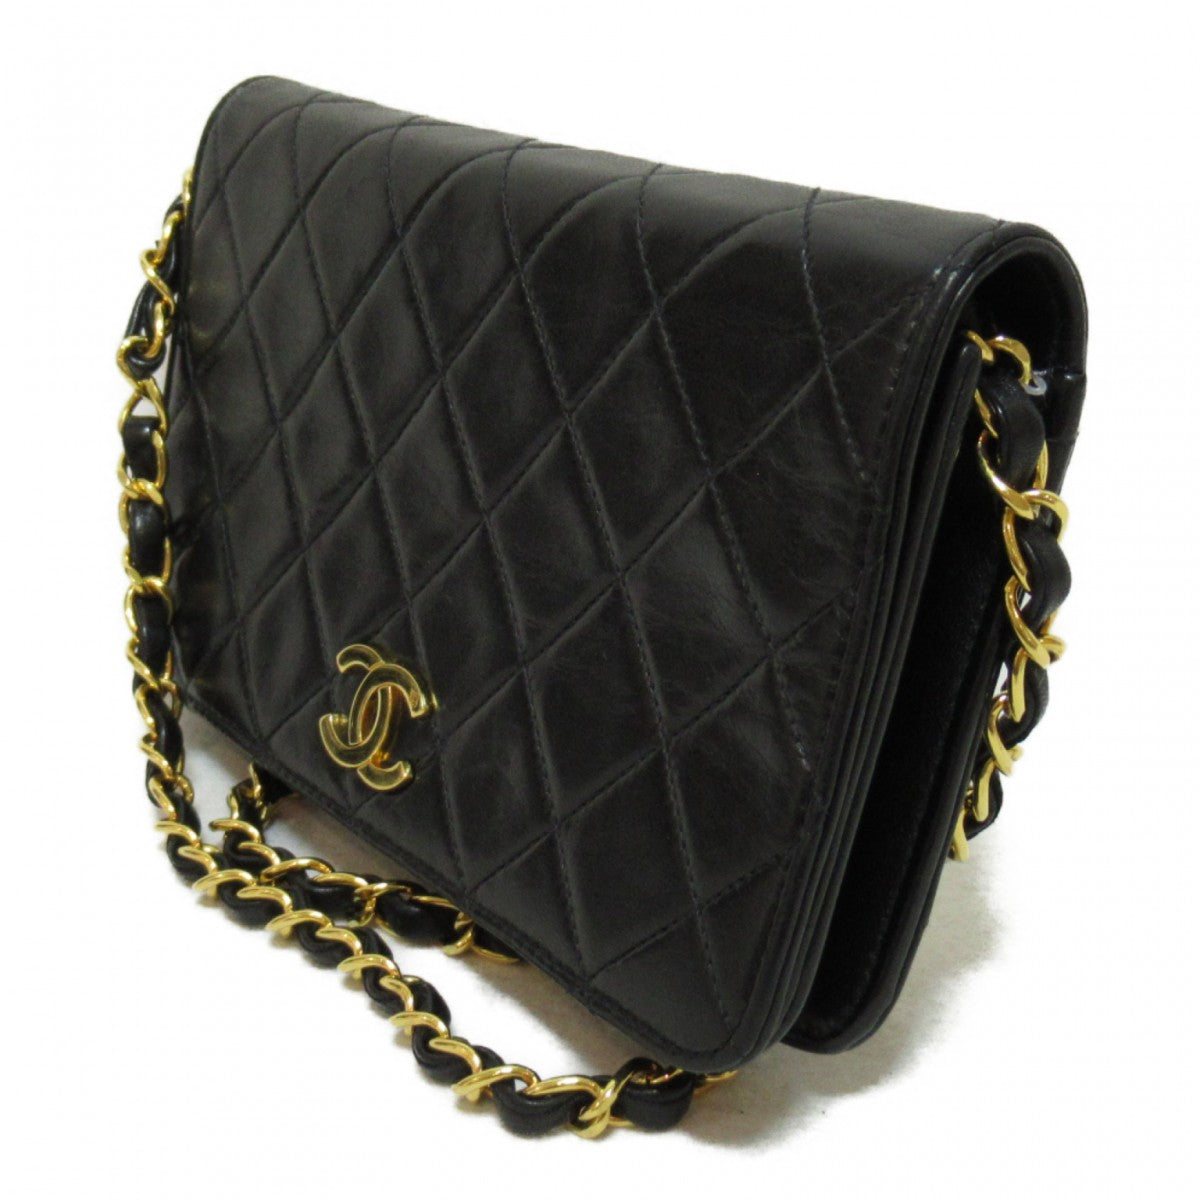 CC Quilted Leather Full Flap Bag